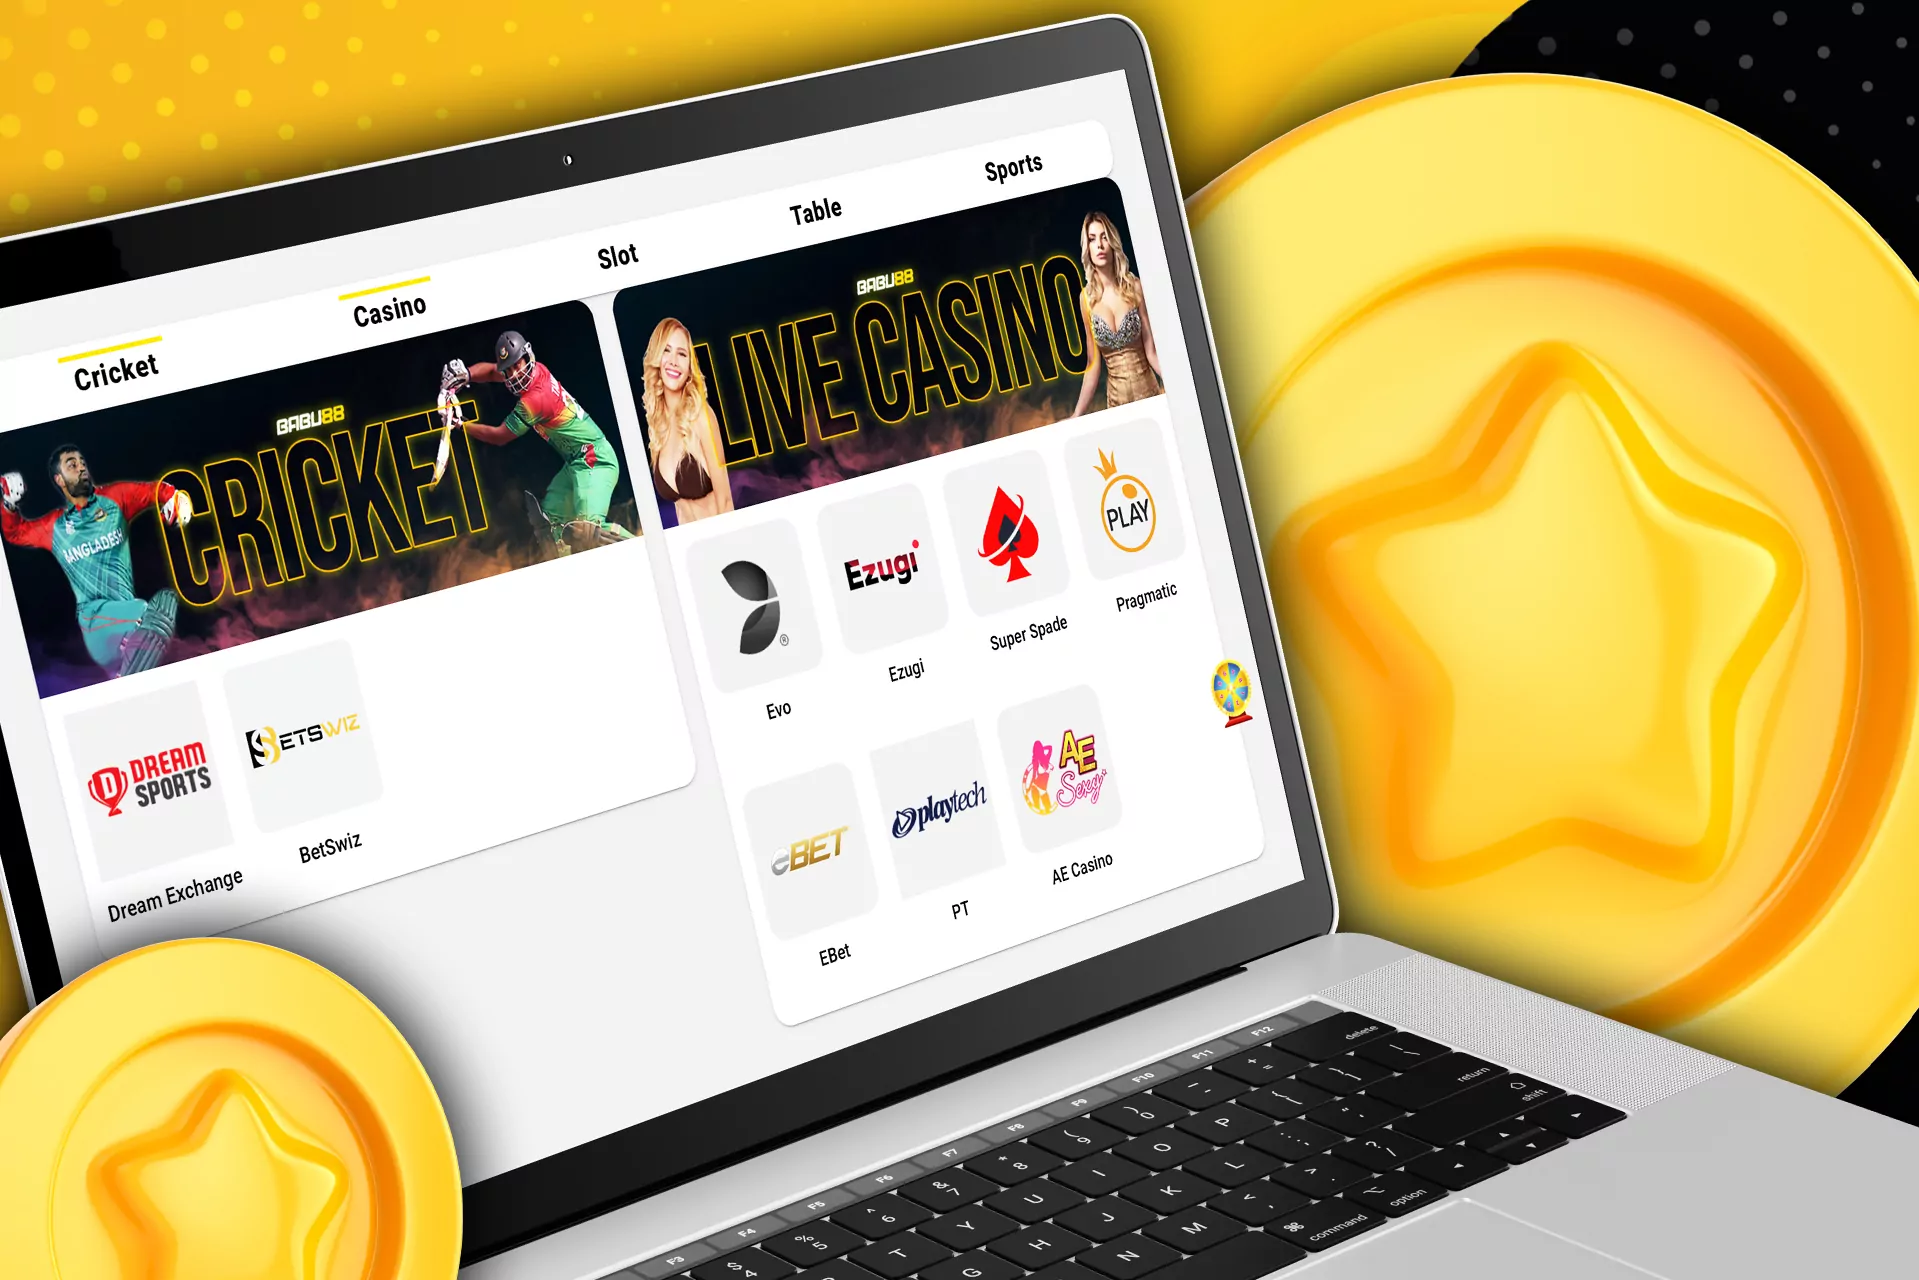 Babu88 offers various betting markets and onlien casino games.